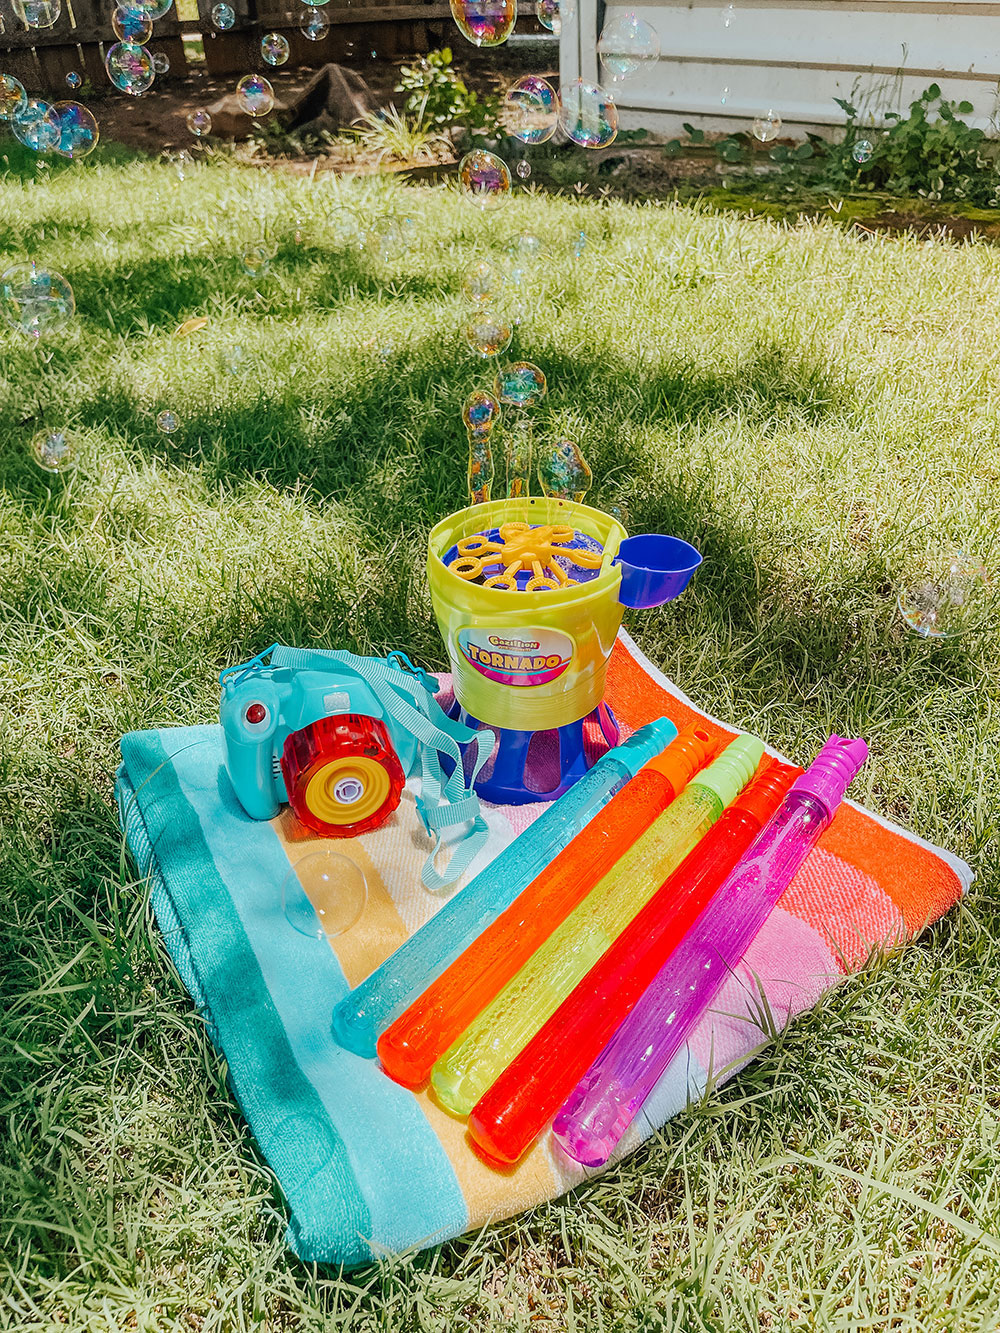 outdoor activities for kids - bubbles toys